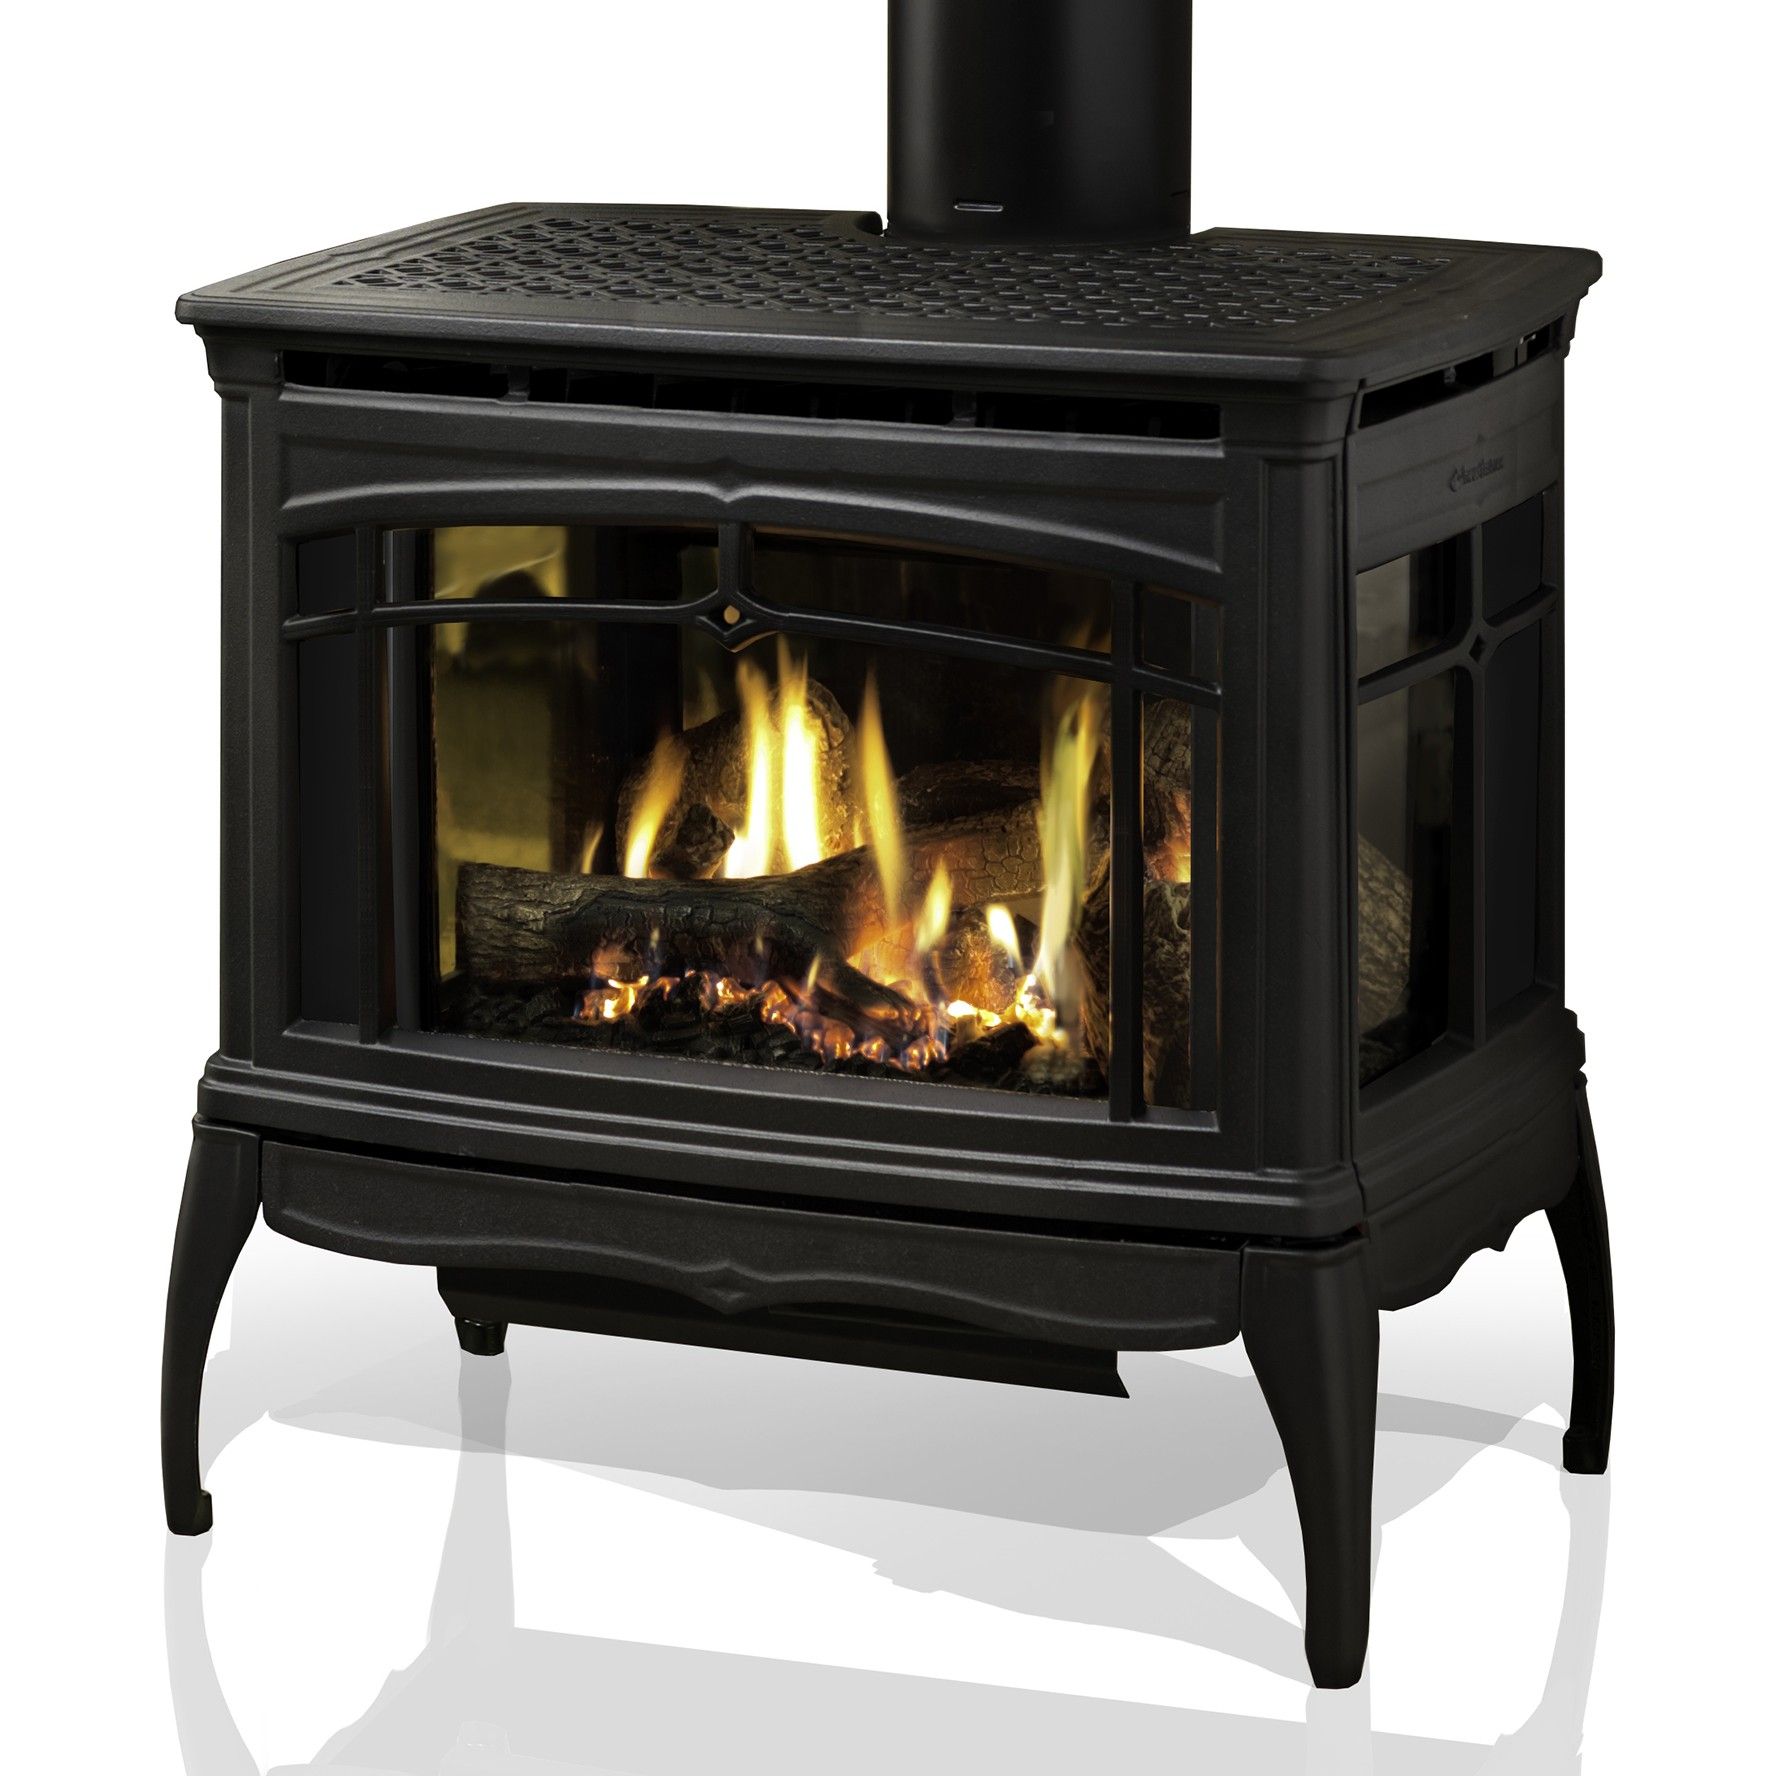 Gas Burning Fireplace Insert Best Of Hearthstone Waitsfield Dx 8770 Gas Stove